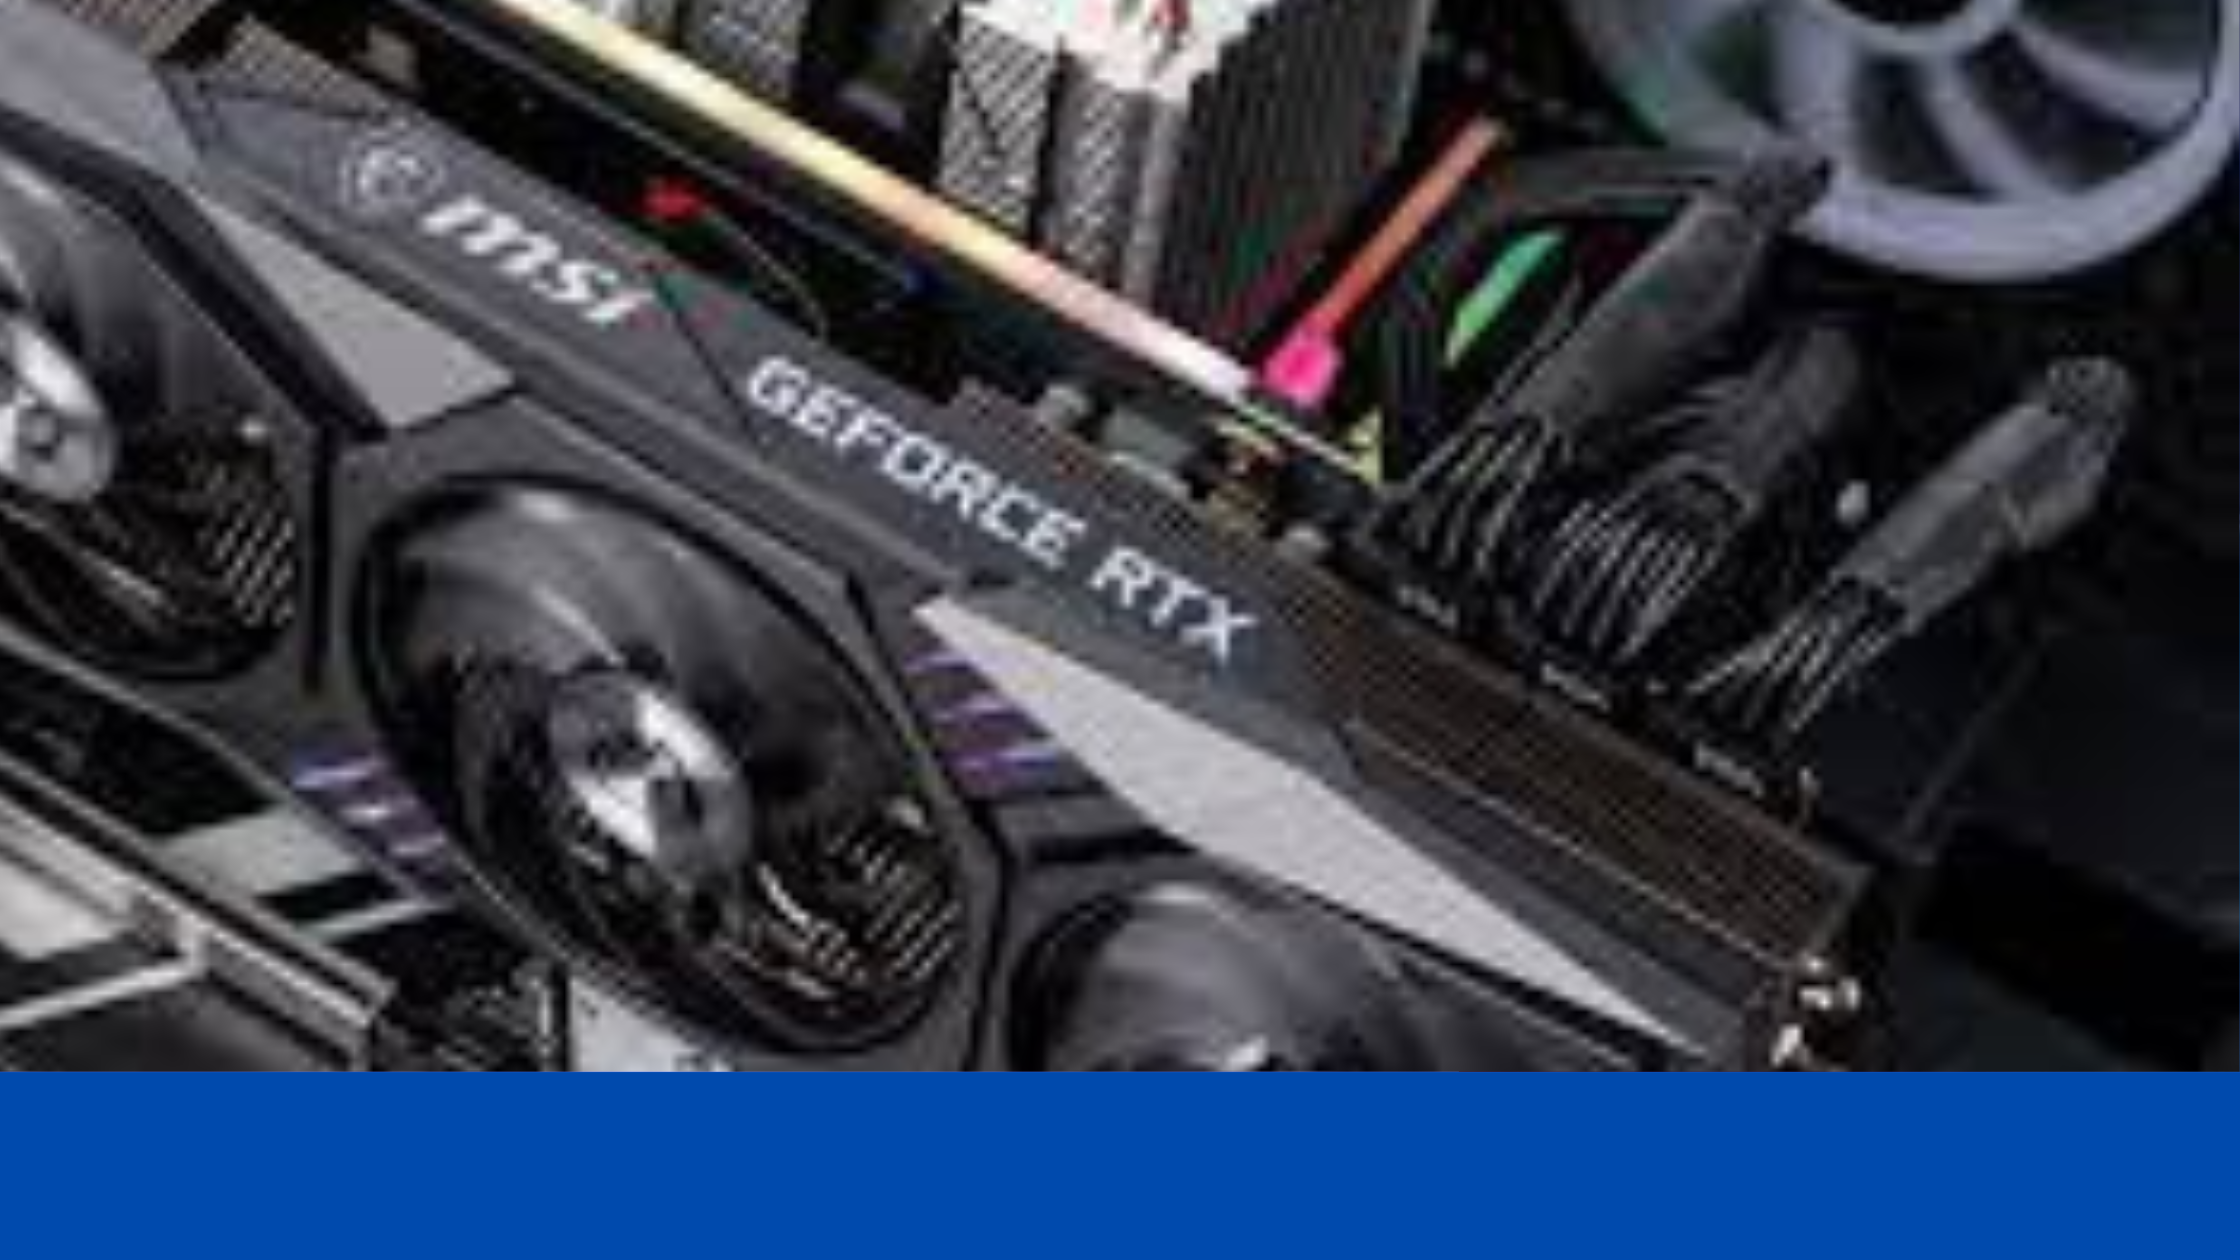 How to use more than one GPU when mining if you have 2 (Explained)